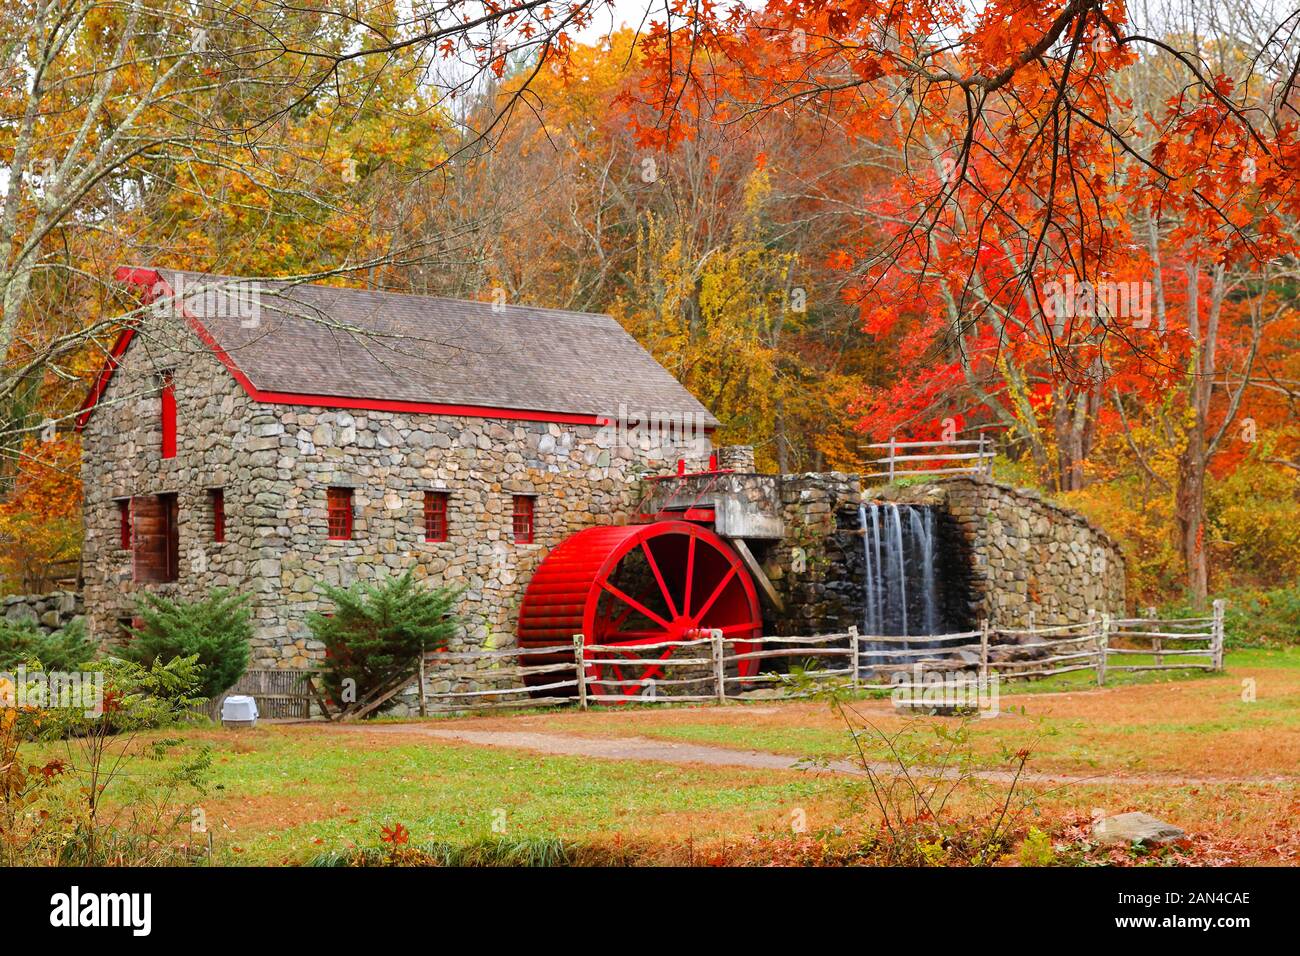 The Wayside Inn Grist Mill with water wheel and cascade water fall in Autumn. Stock Photo